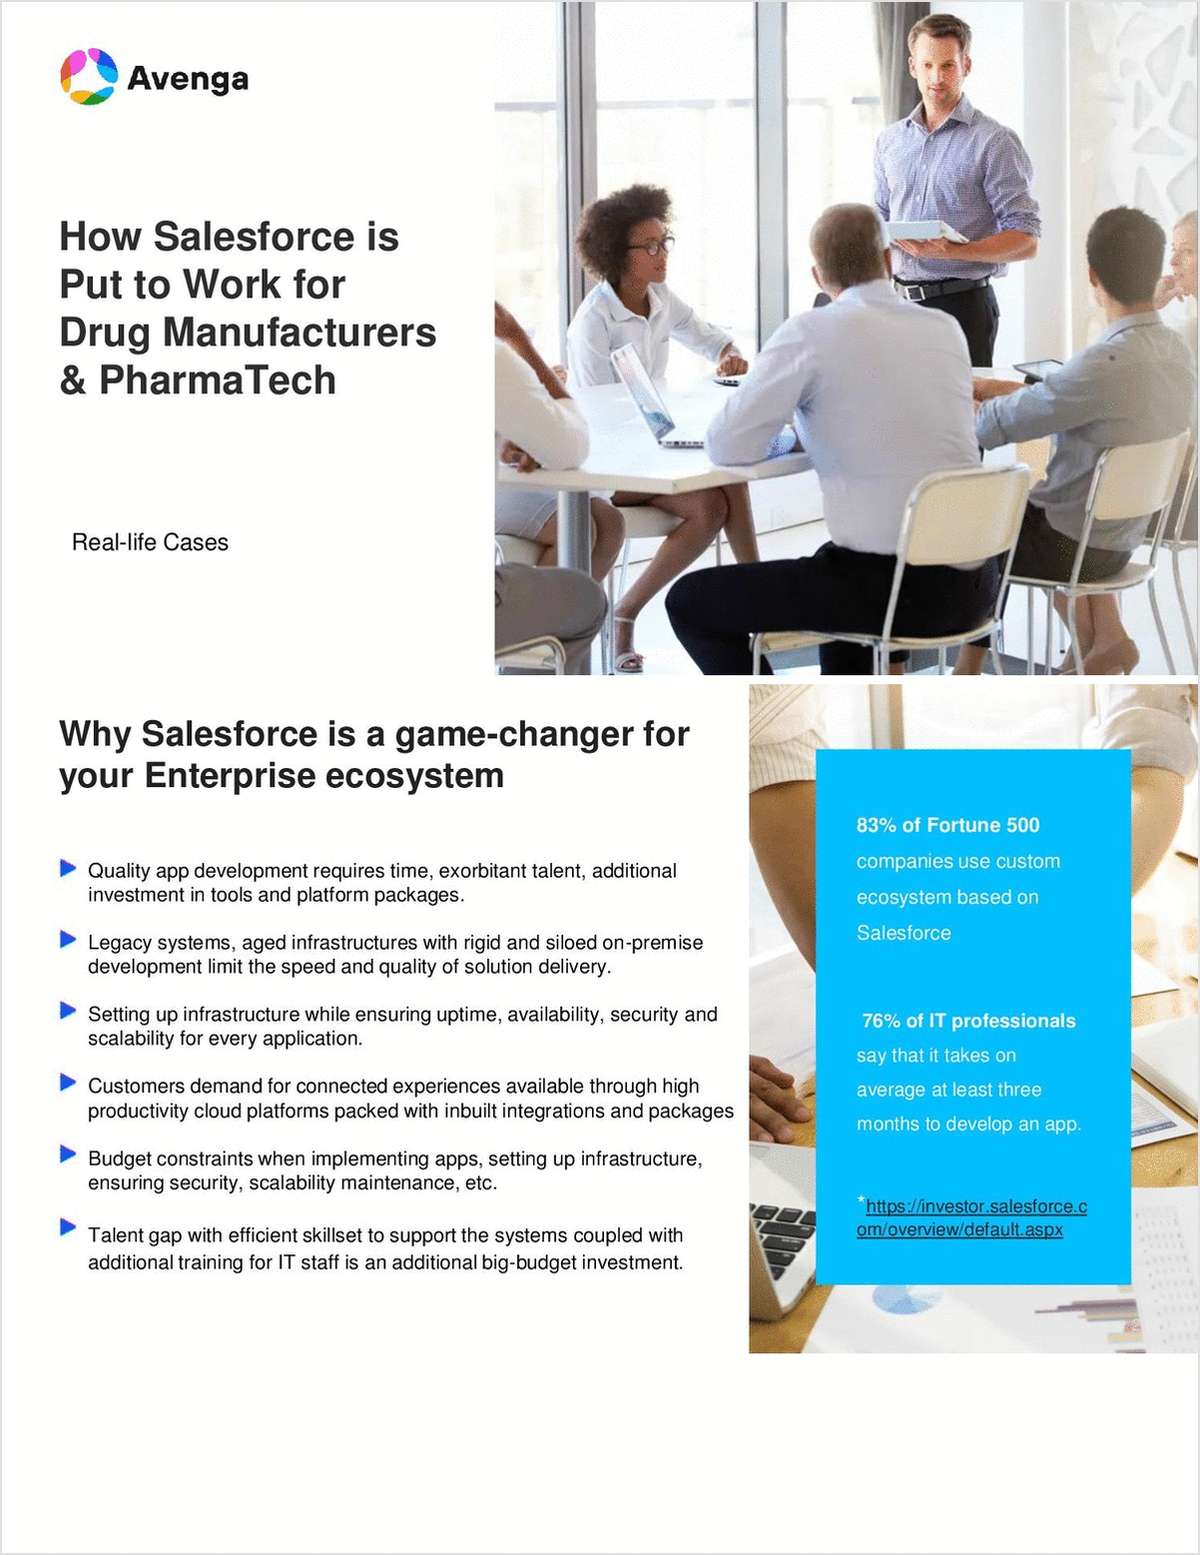 How Salesforce is Put to Work for Drug Manufacturers & PharmaTech: Real Cases